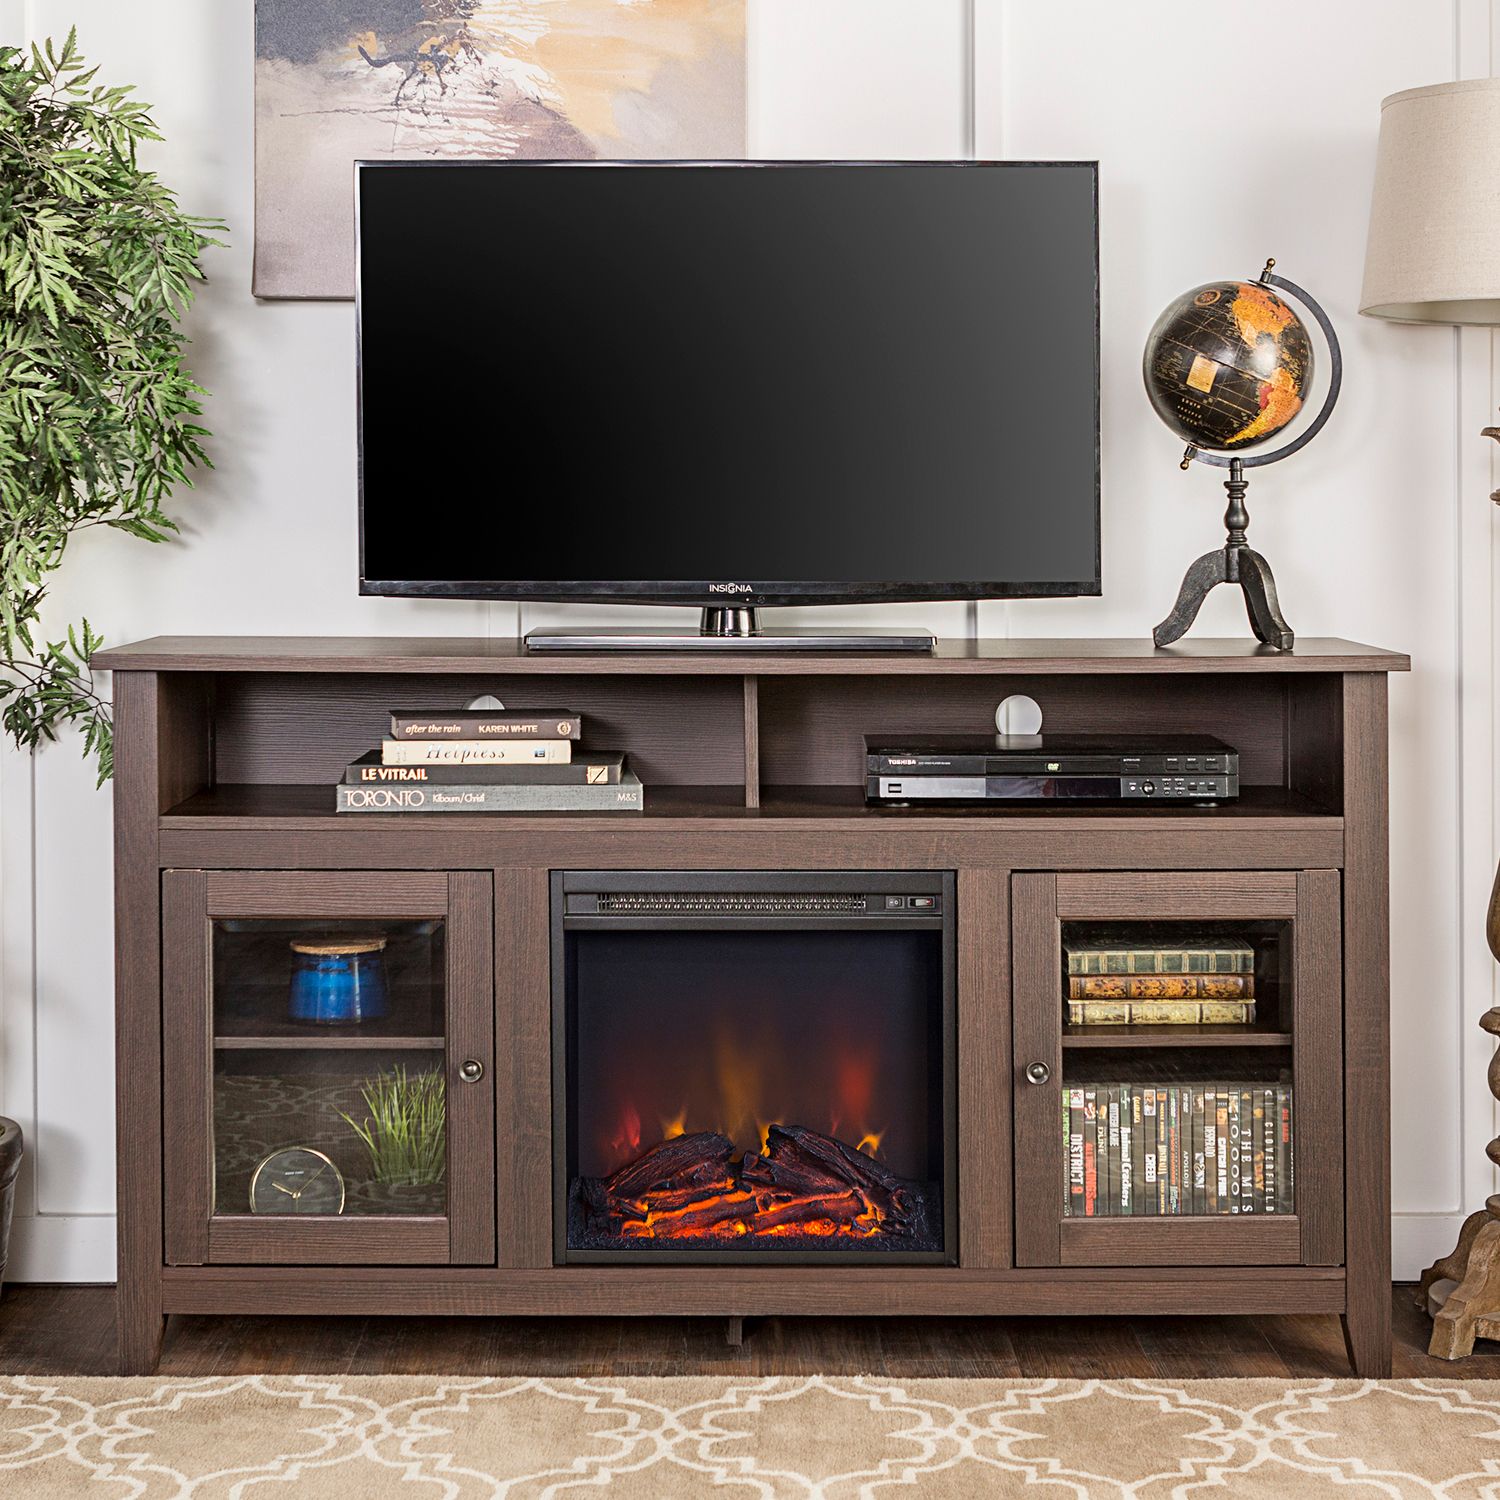 Highboy Wood Fireplace Tv Stand – Pier1 Within Wood Highboy Fireplace Tv Stands (View 4 of 20)